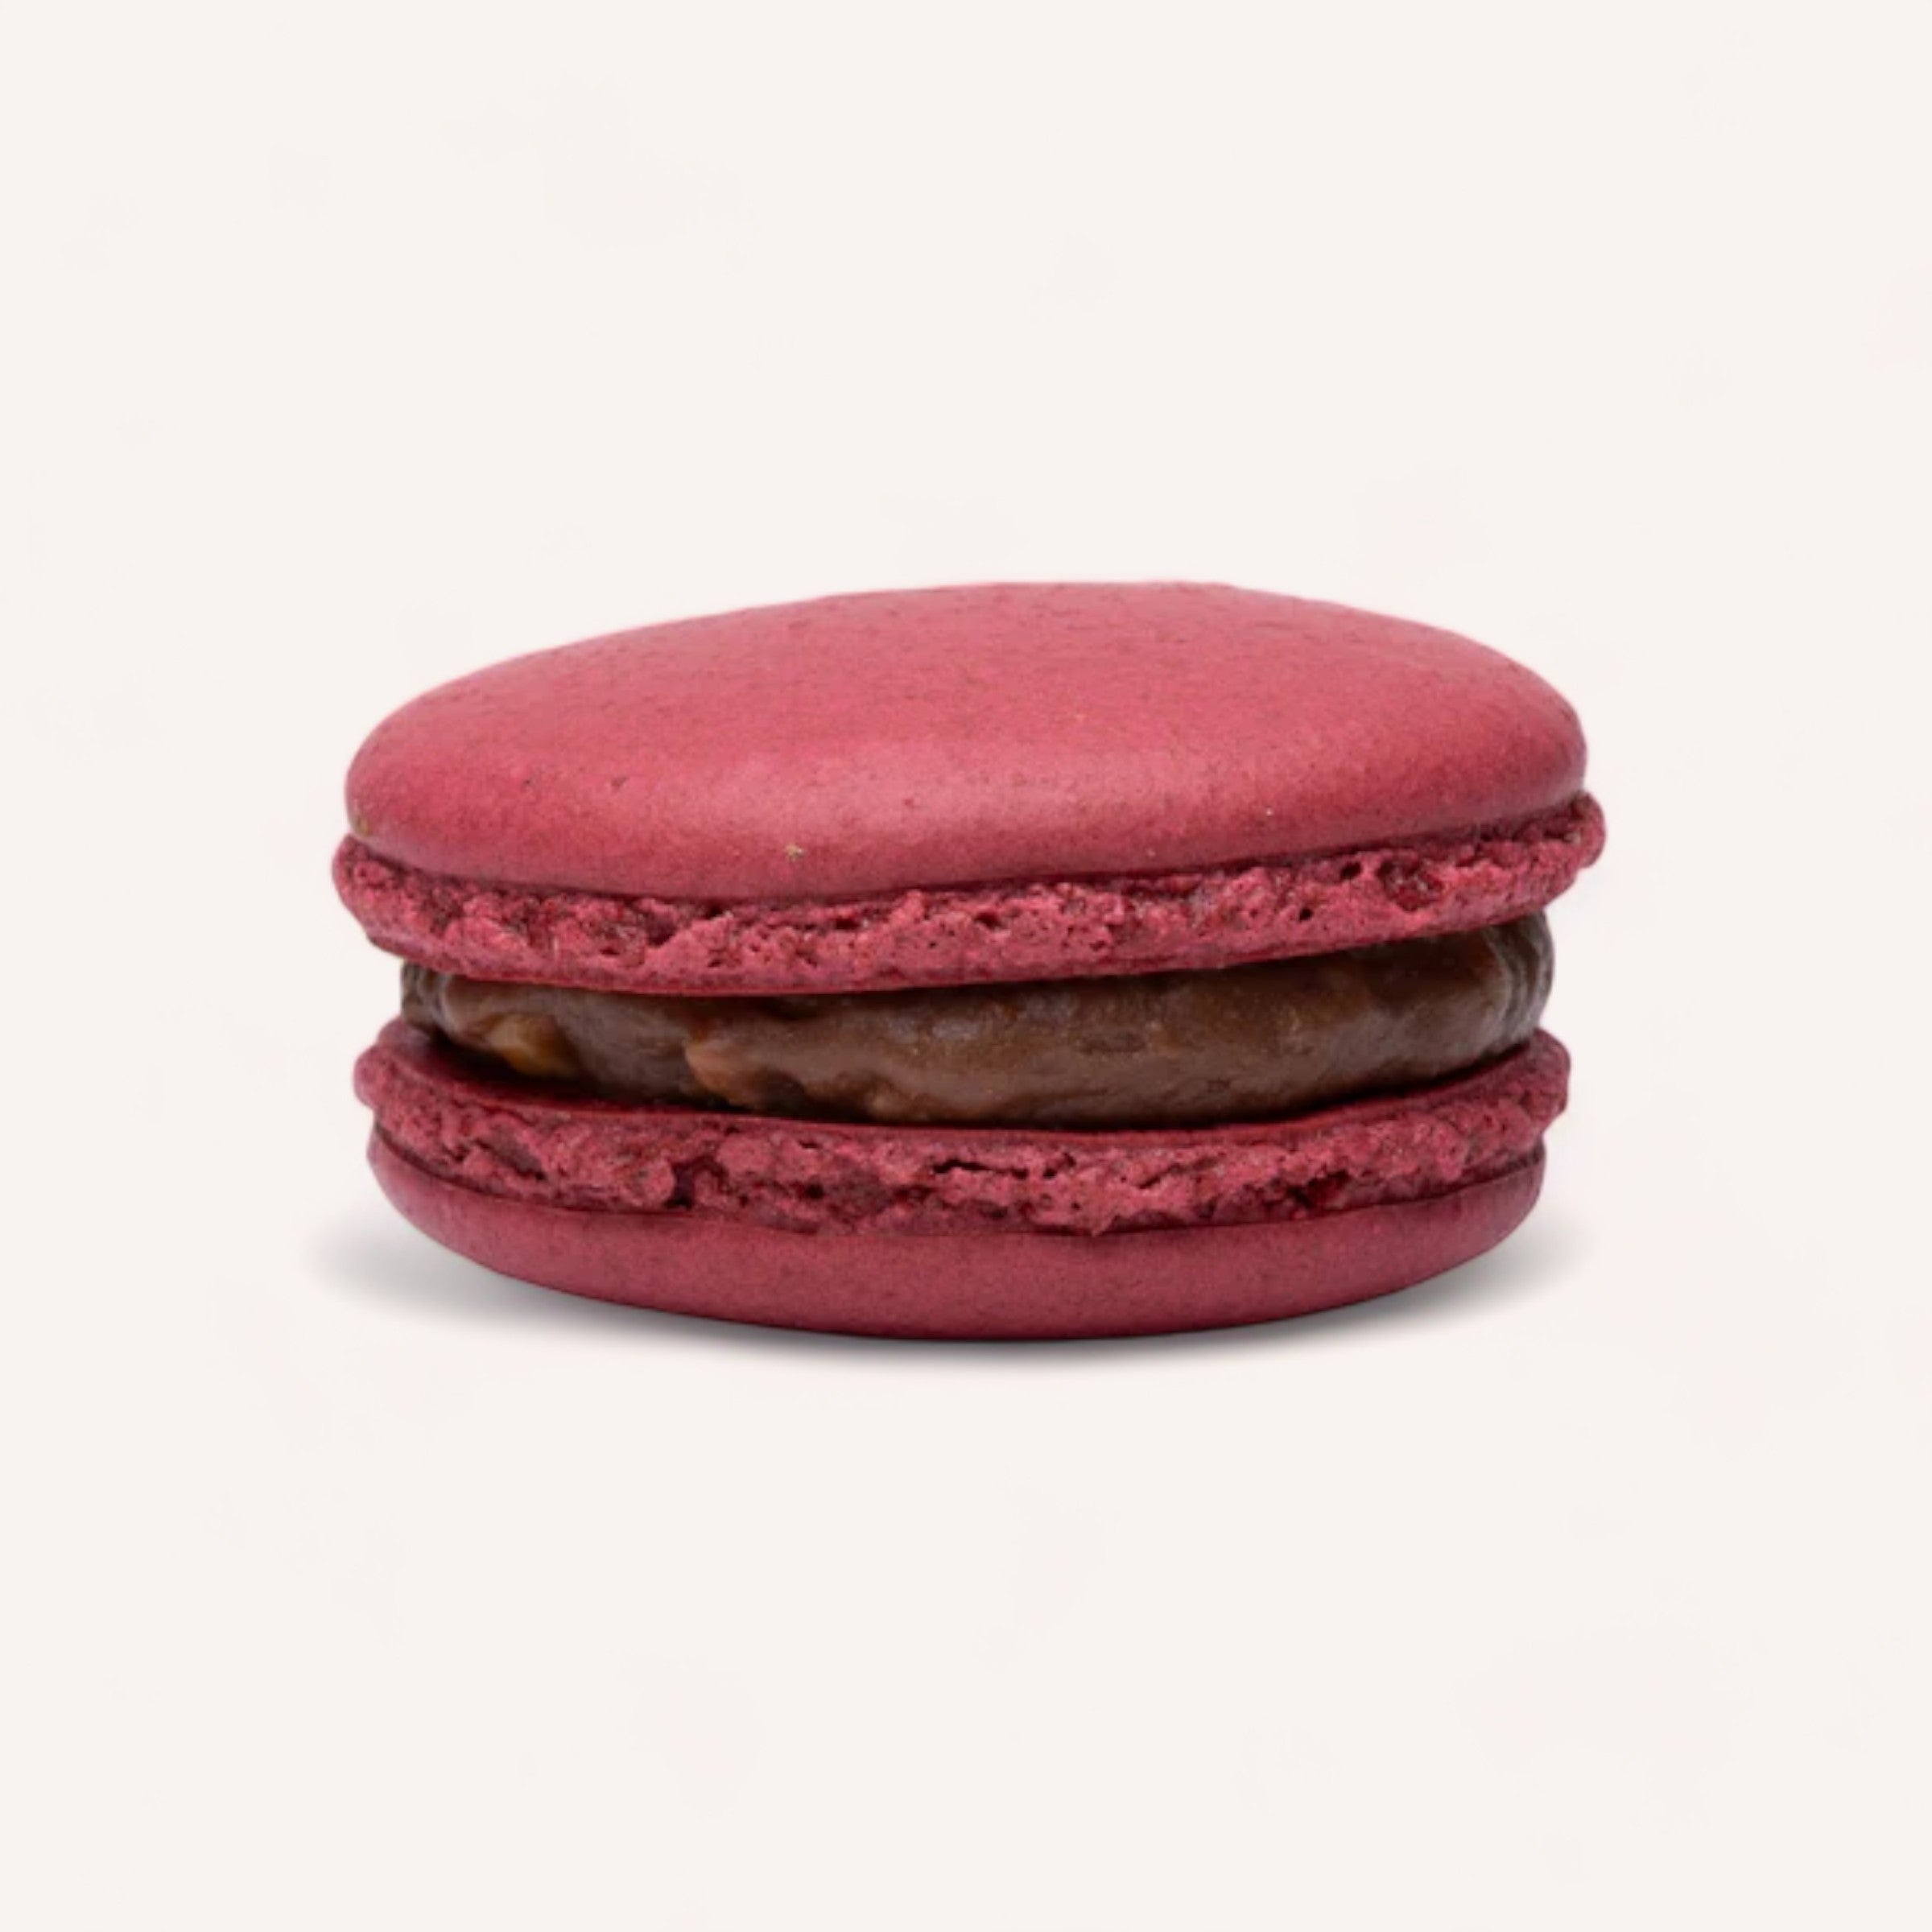 A single handmade raspberry macaron from the Box of 12 Macarons by J'aime les Macarons, with a rich, creamy filling, showcased against a clean white background.